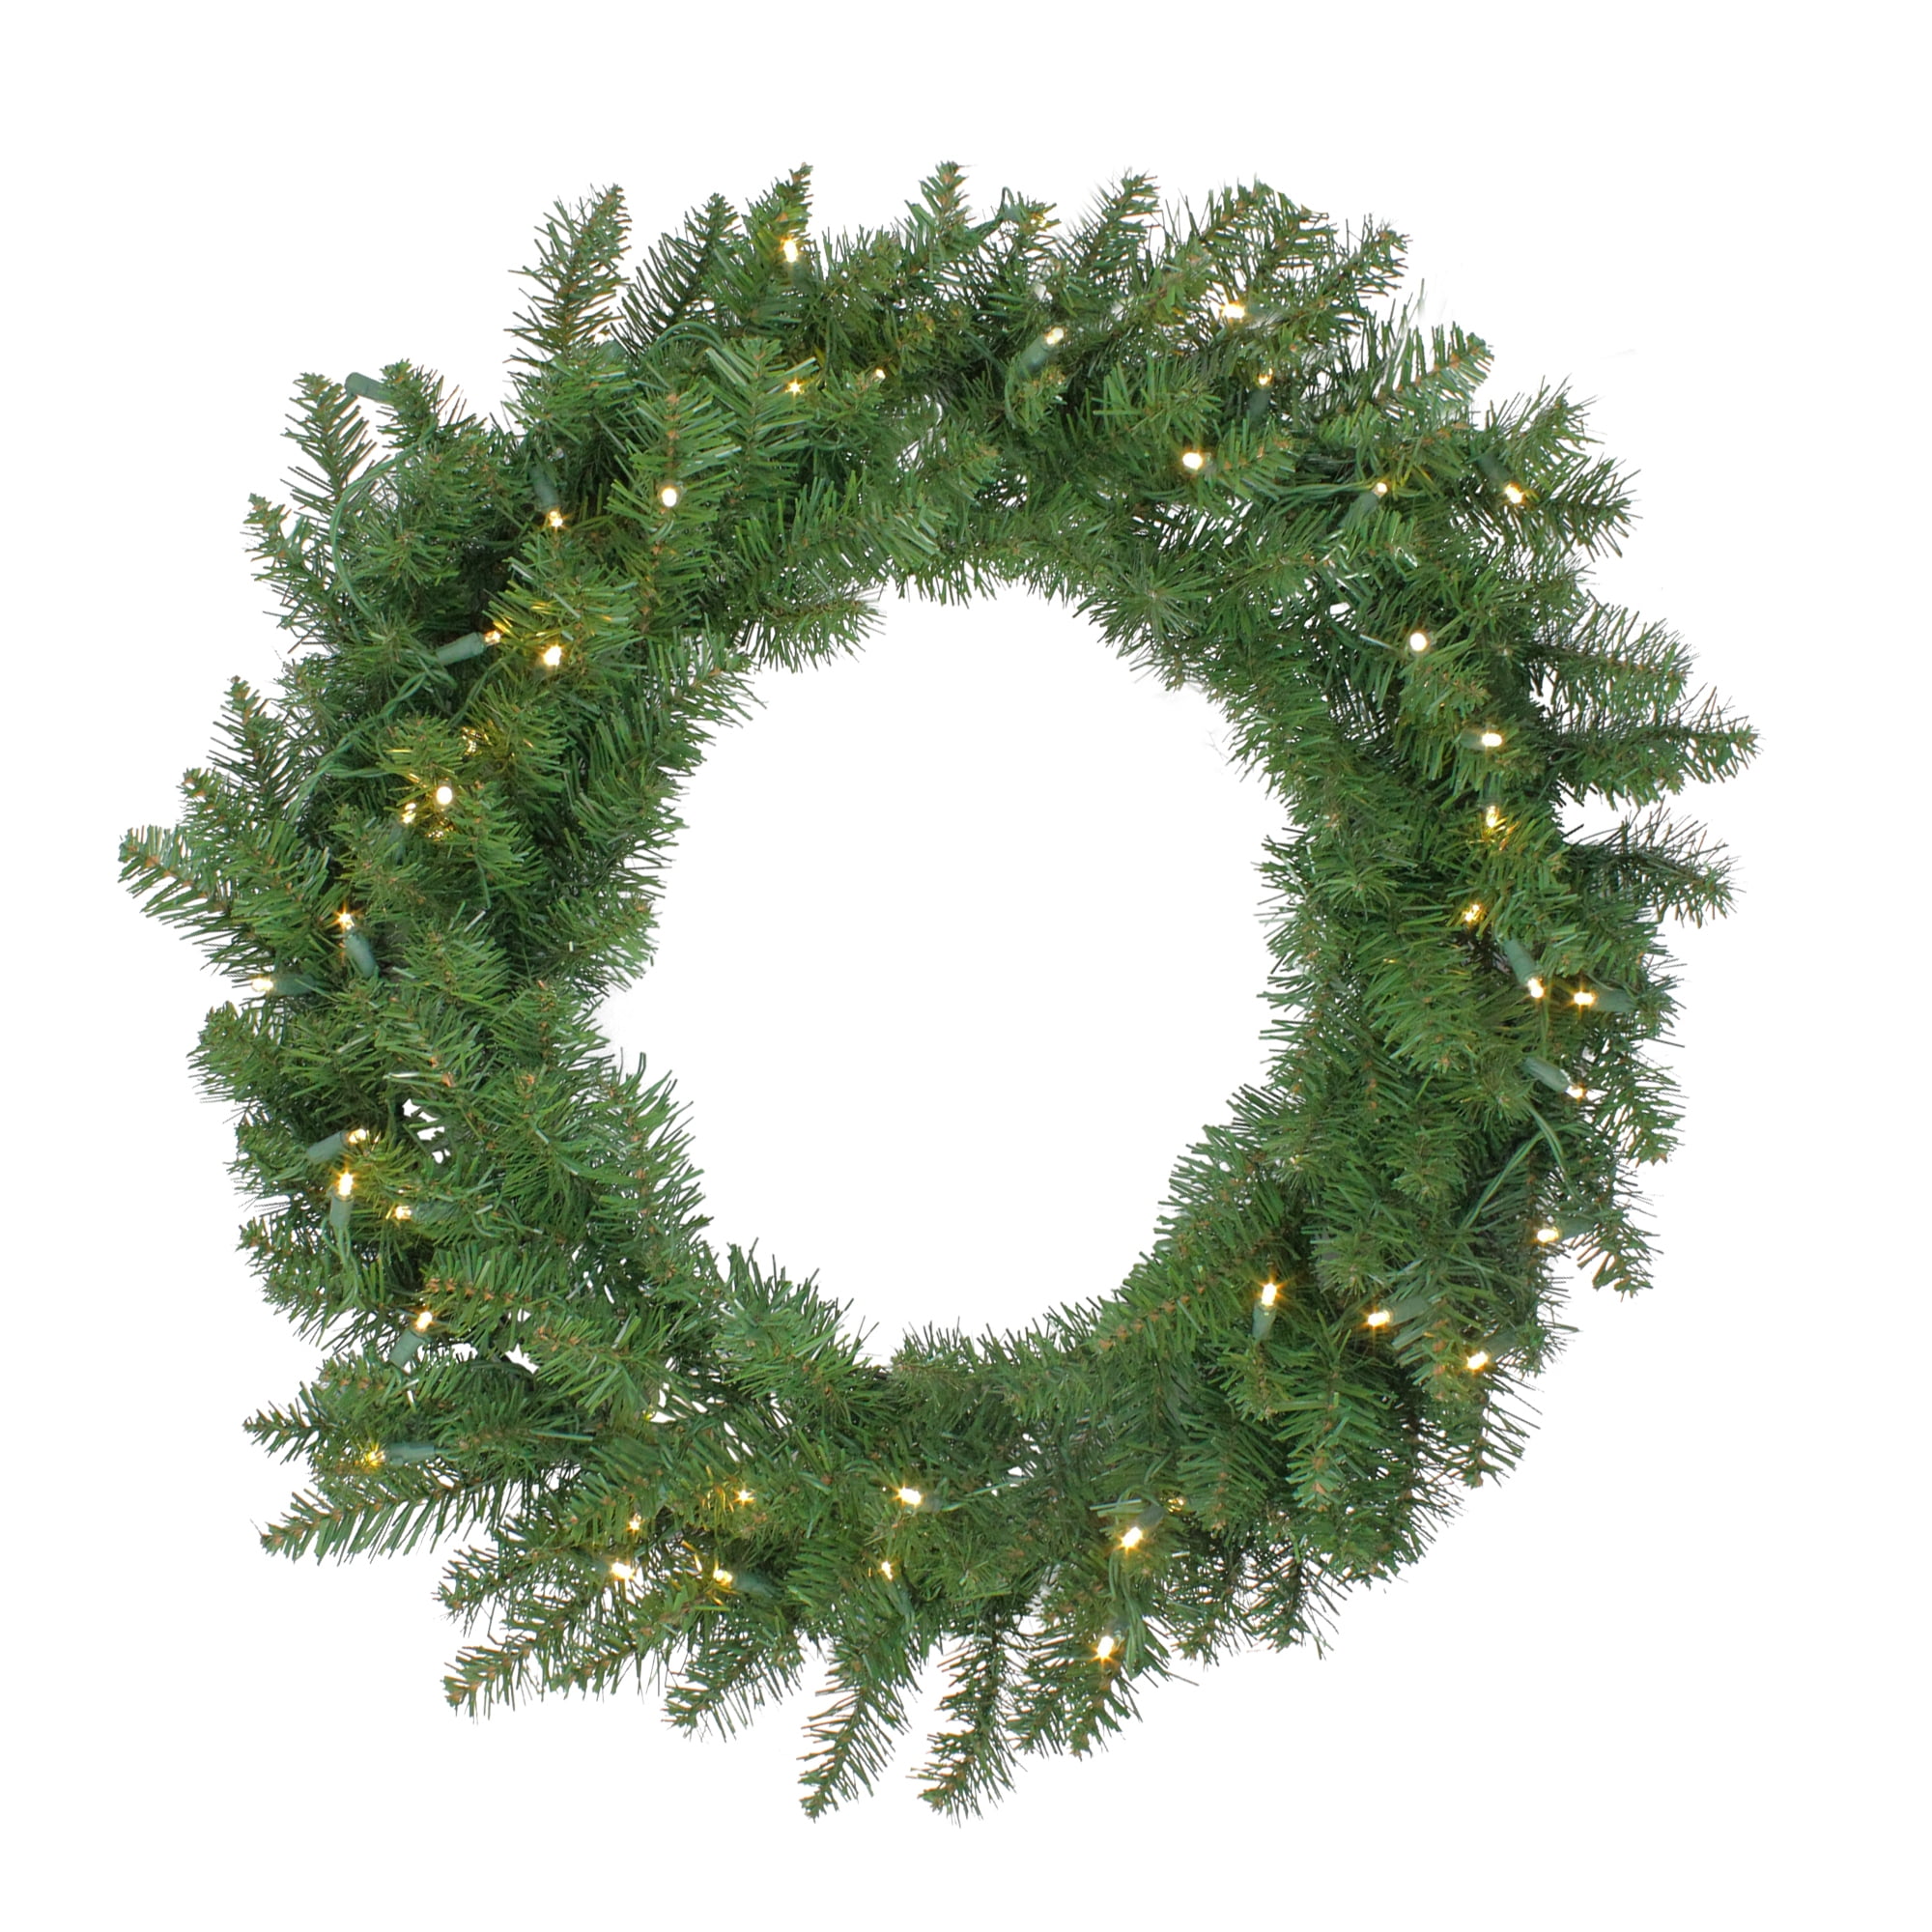 Details about   30-IN PRE-LIT WREATH WITH 50 WHITE MICRO DOT LED LIGHTS & 275 MIXED BRANCH TIPS 